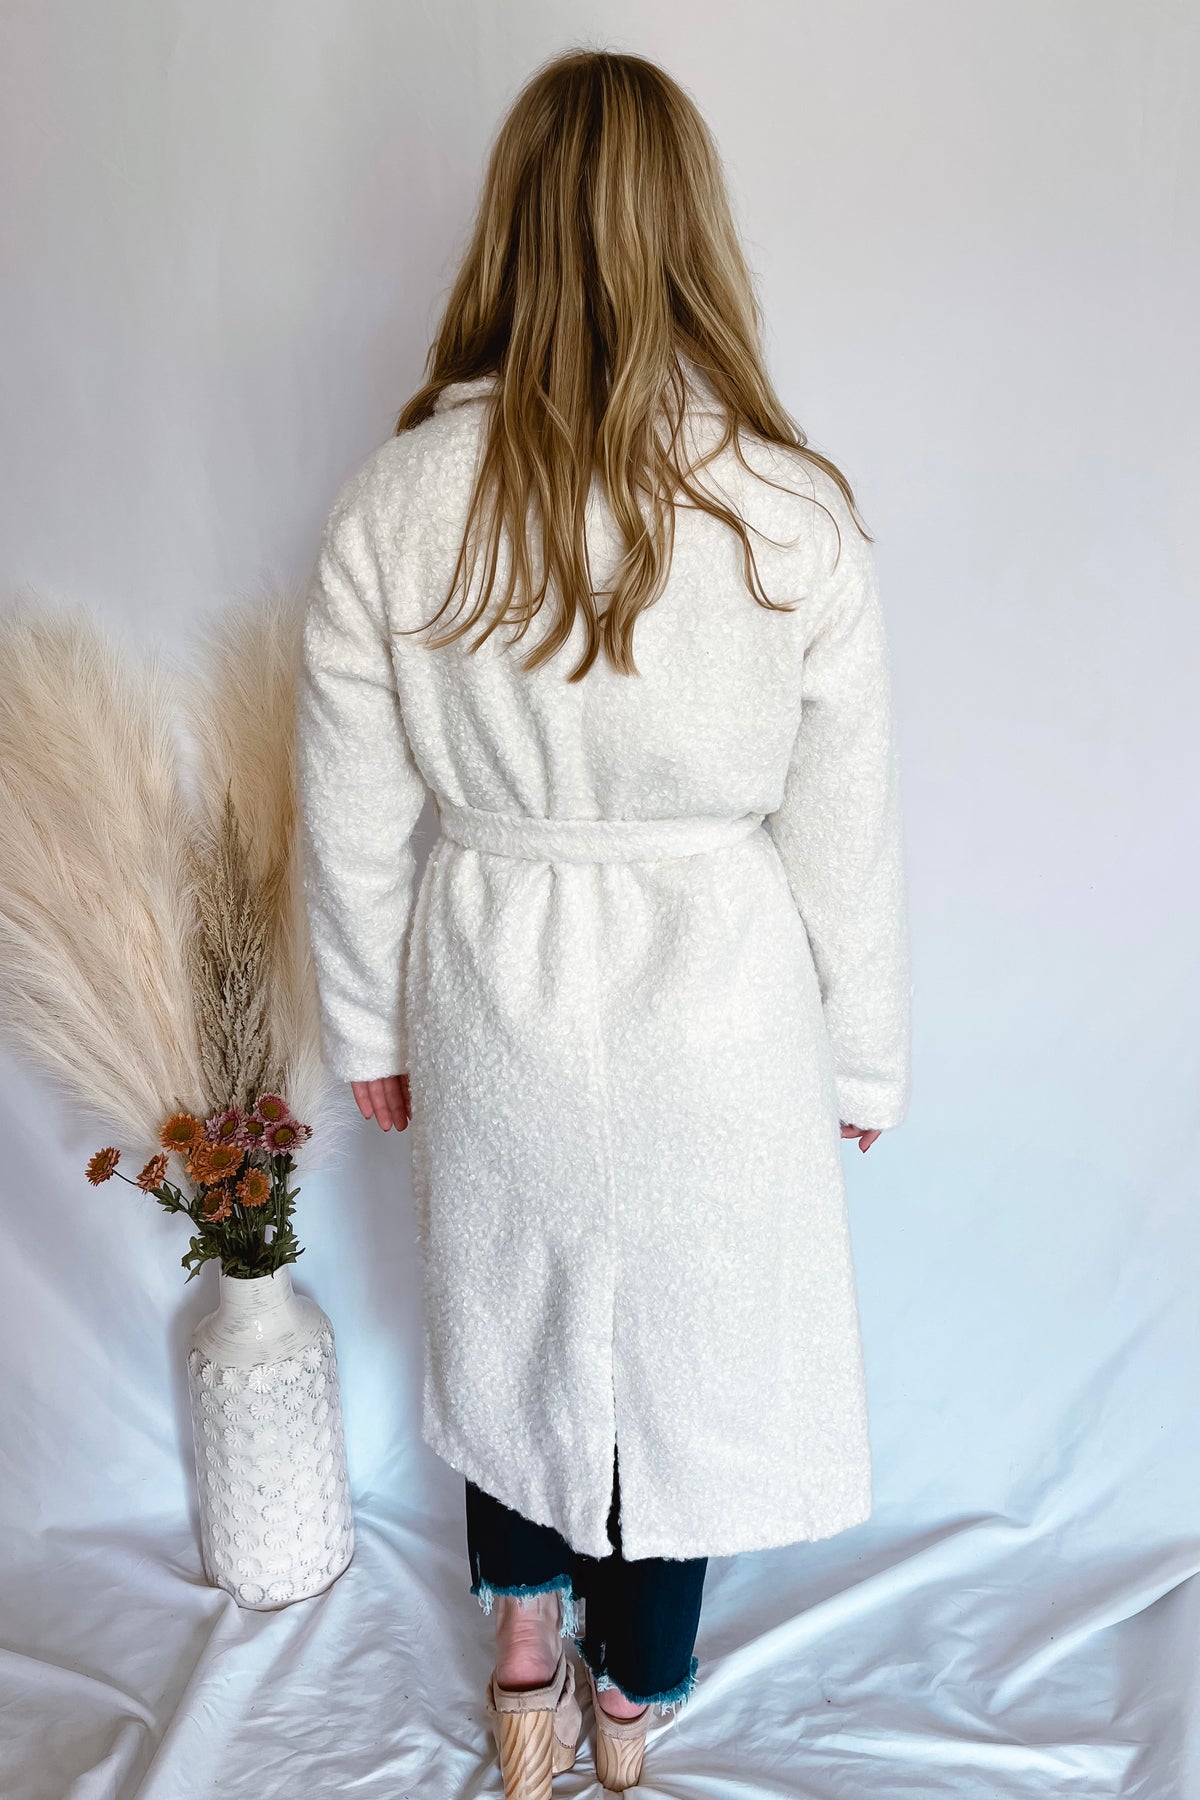 Escaping Winter Long Teddy Coat - Ivory